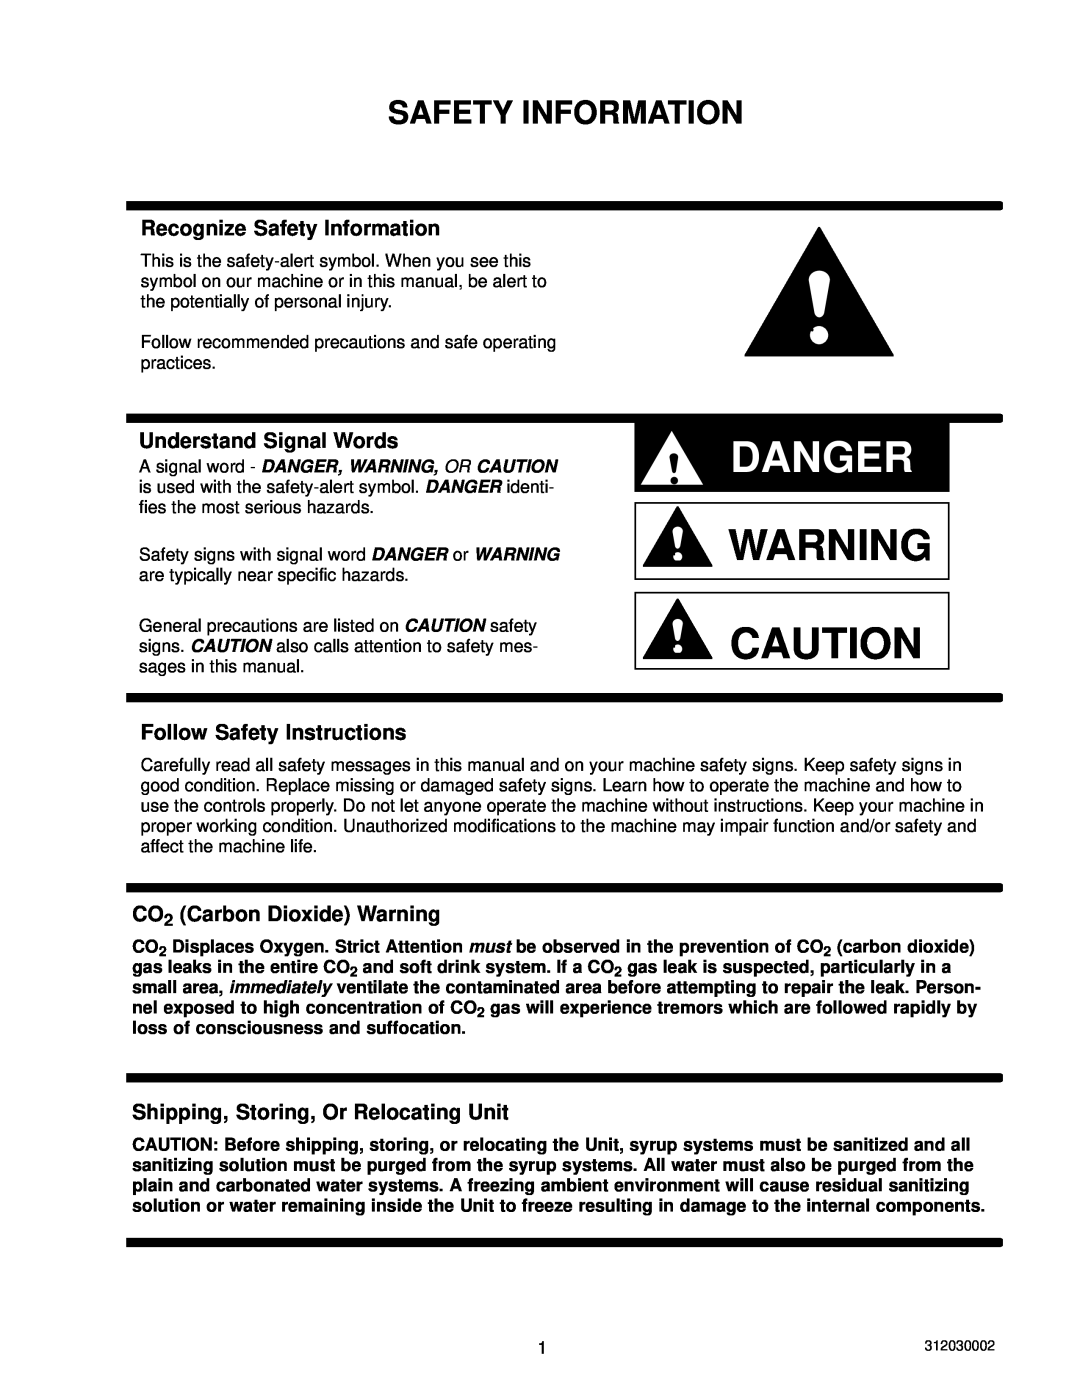 Cornelius R-404A manual Recognize Safety Information, Understand Signal Words, Follow Safety Instructions, Danger 